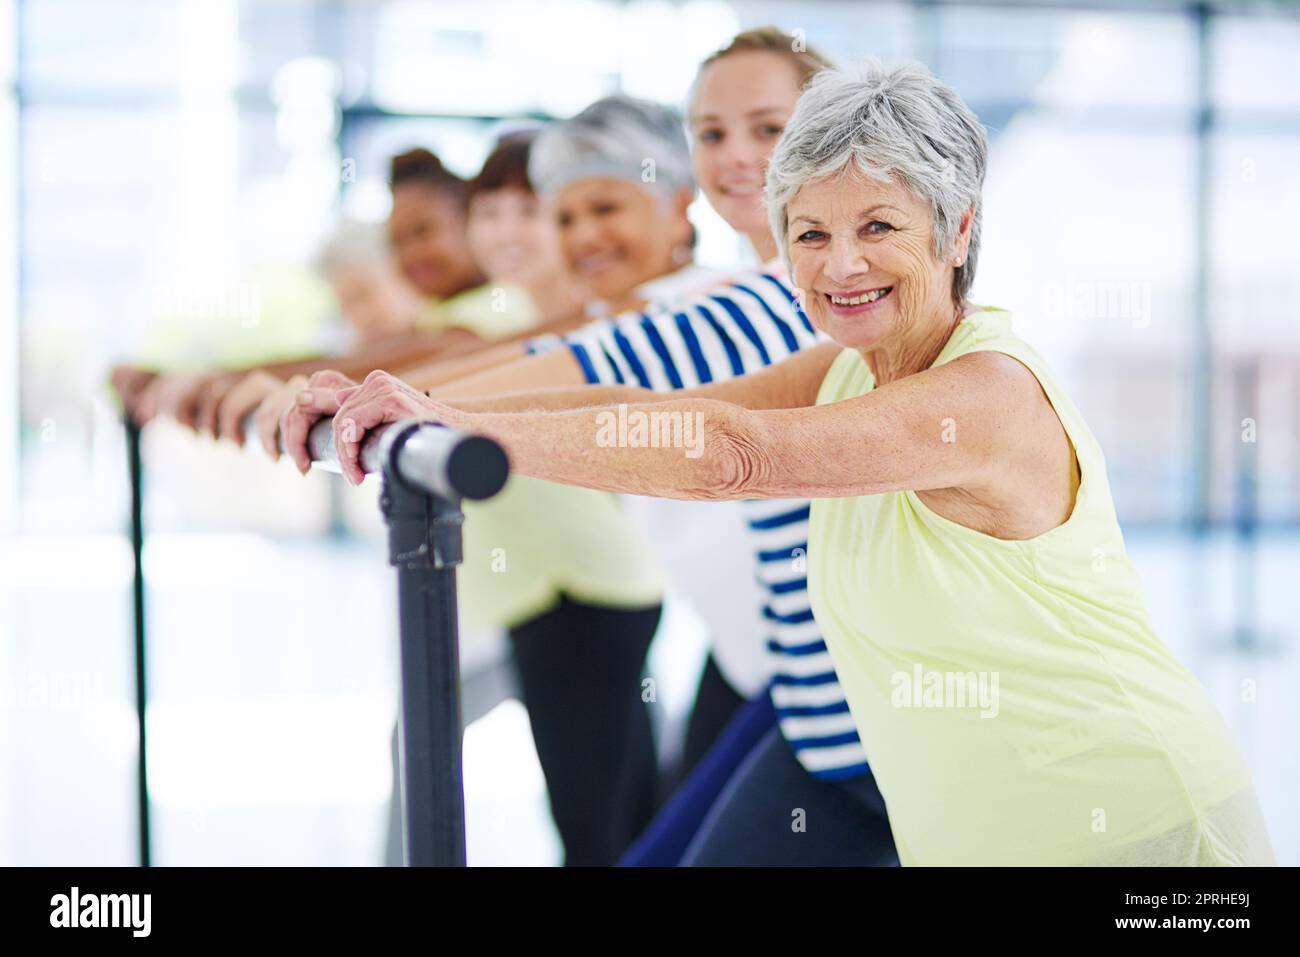 Fitness is a way of life. a group of women working out indoors. Stock Photo